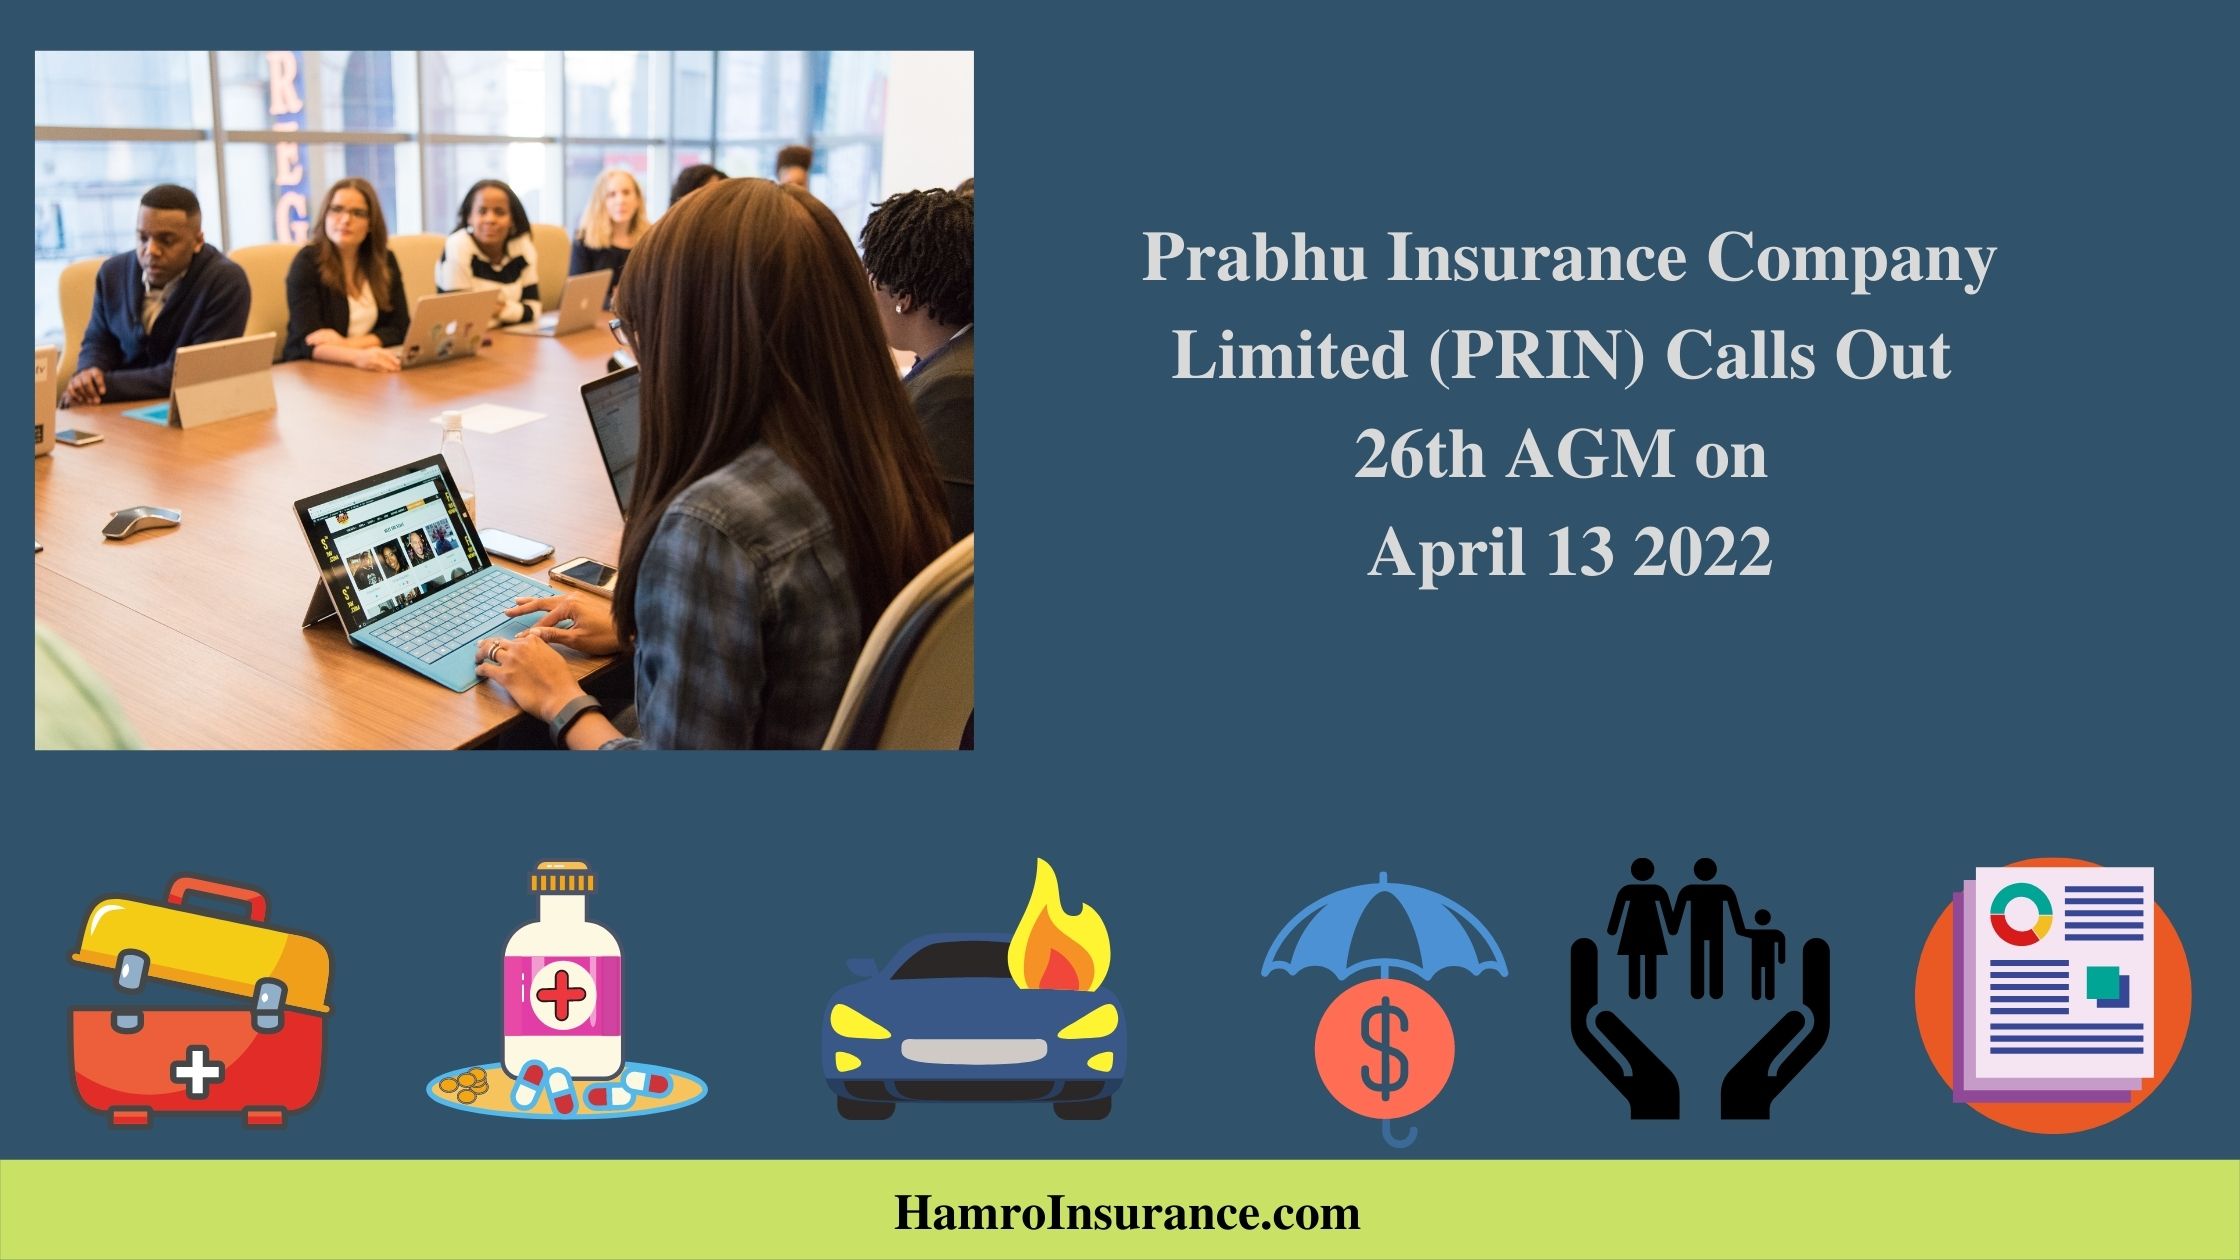 Prabhu Insurance Company Limited (PRIN) Calls Out 26th AGM on April 13 2022